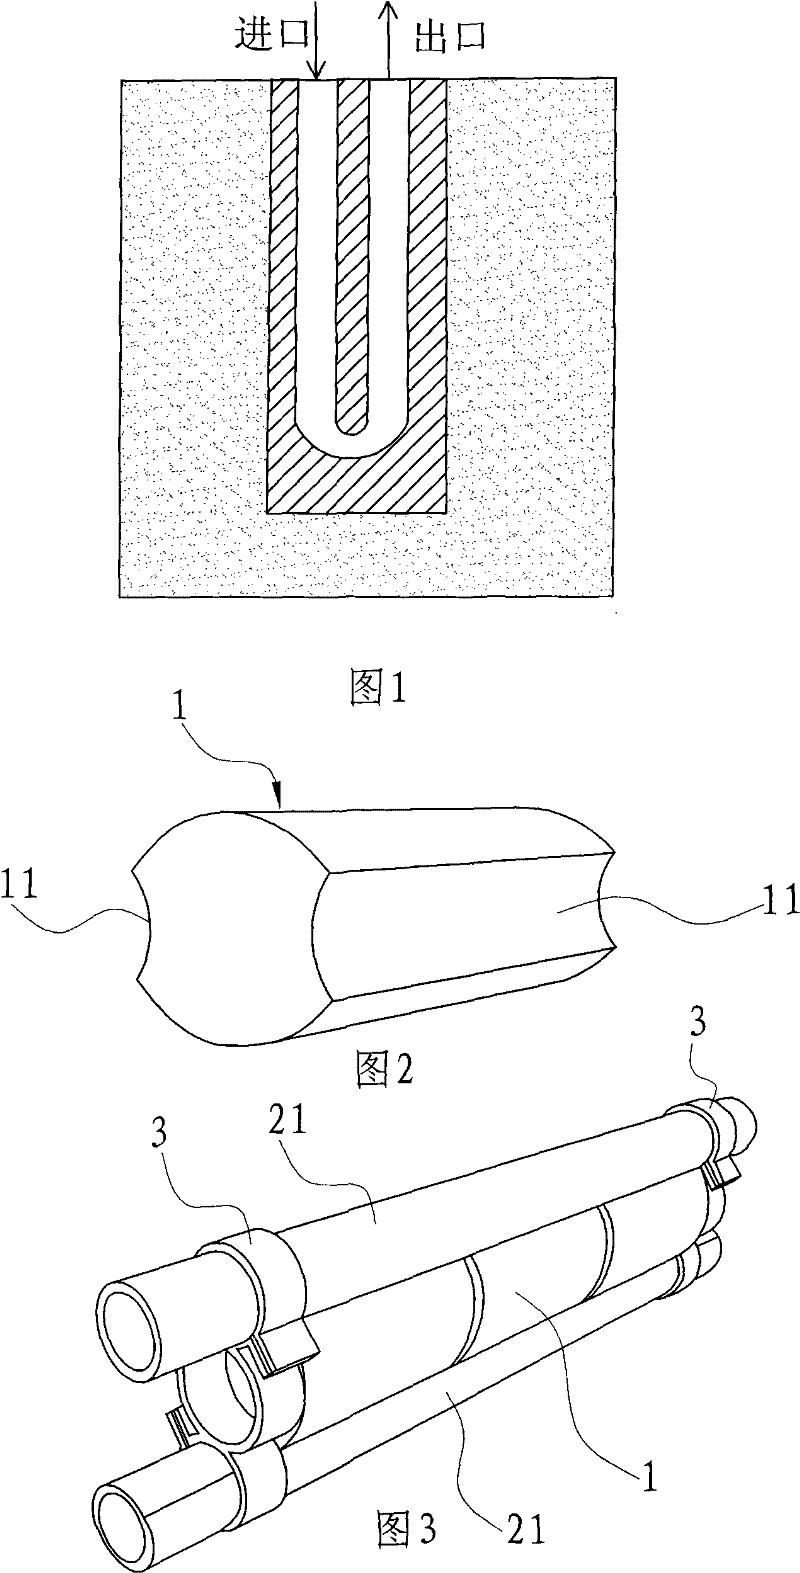 Heat insulation device for U-shaped pipe laying heat exchanger